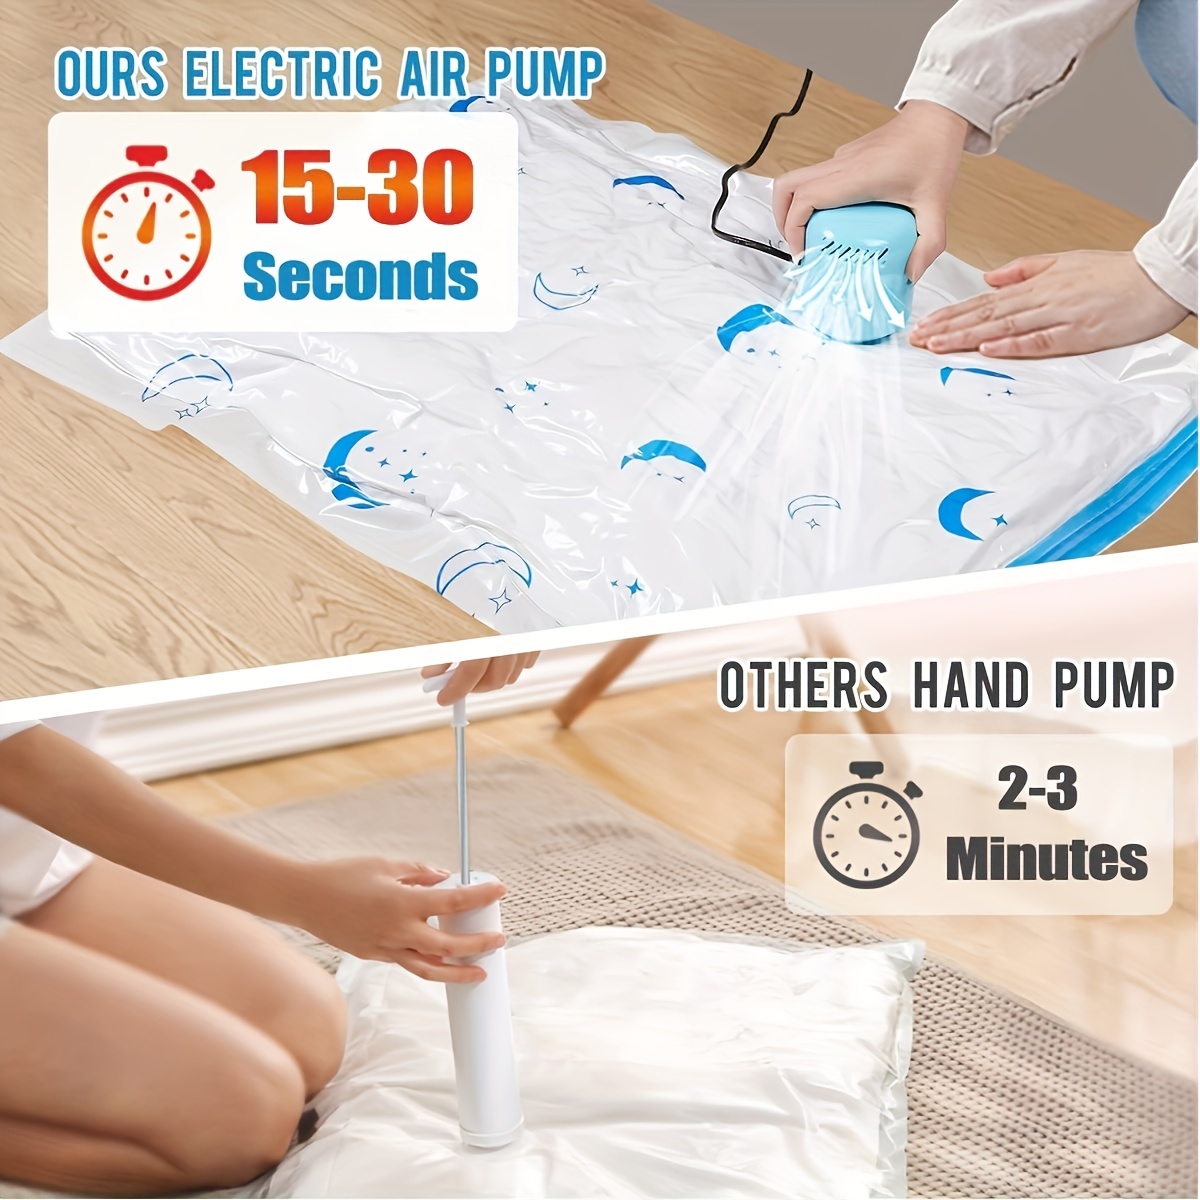 Vacuum Storage Bags. Hand-pump For Travel! Zip Seal And Seal Valve! Vacuum  Sealer Bags For Comforters, Blankets, Bedding, Clothing